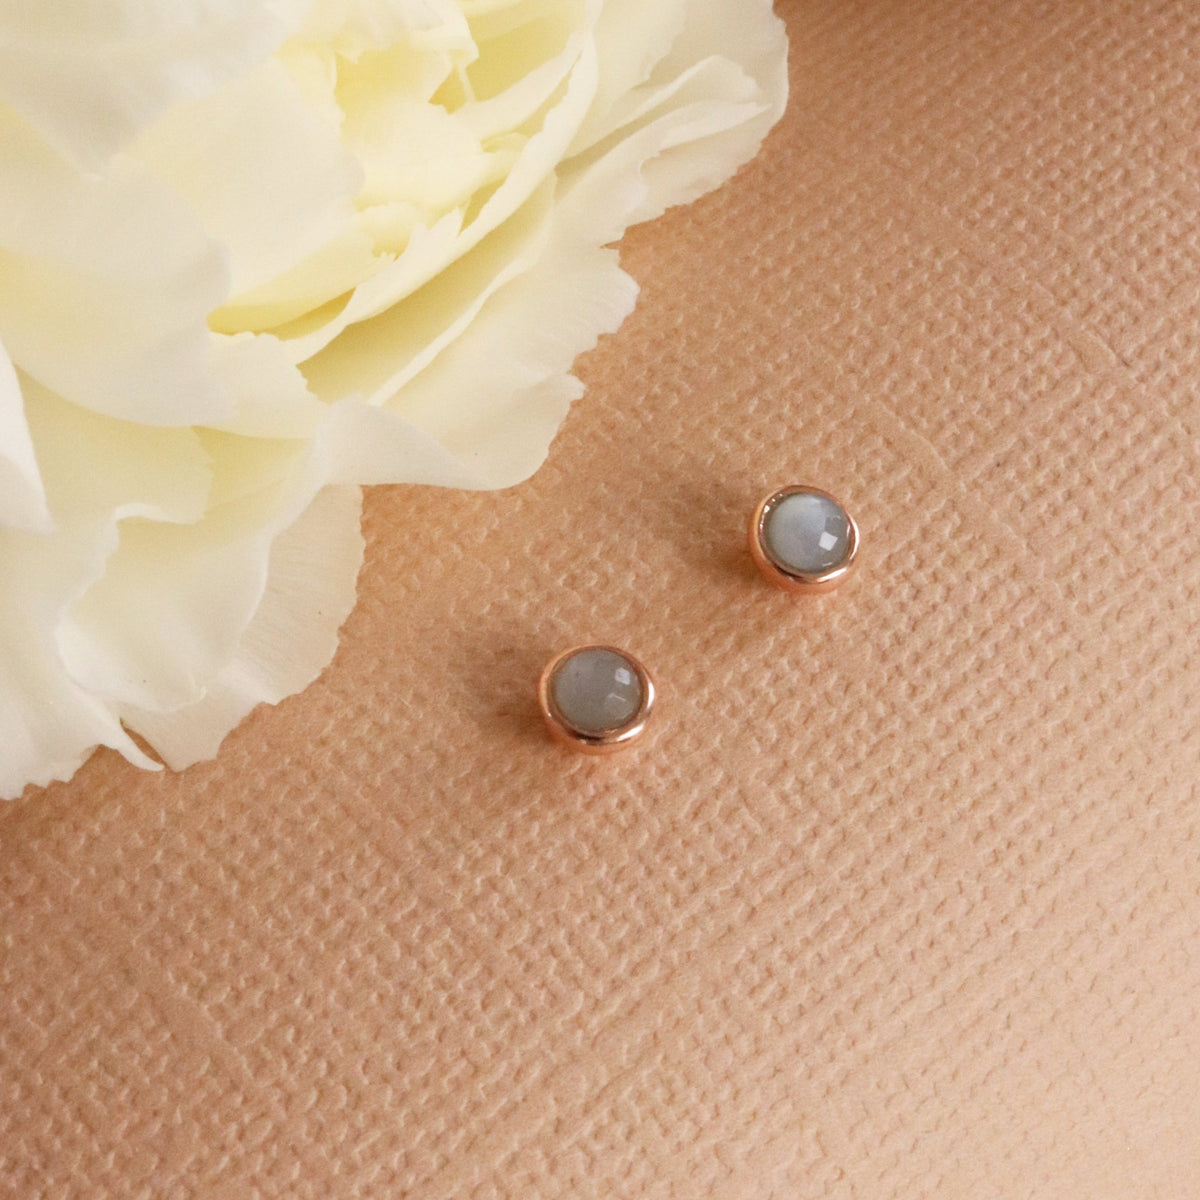 TINY PROTECT STUD EARRINGS - GREY MOONSTONE &amp; ROSE GOLD - SO PRETTY CARA COTTER